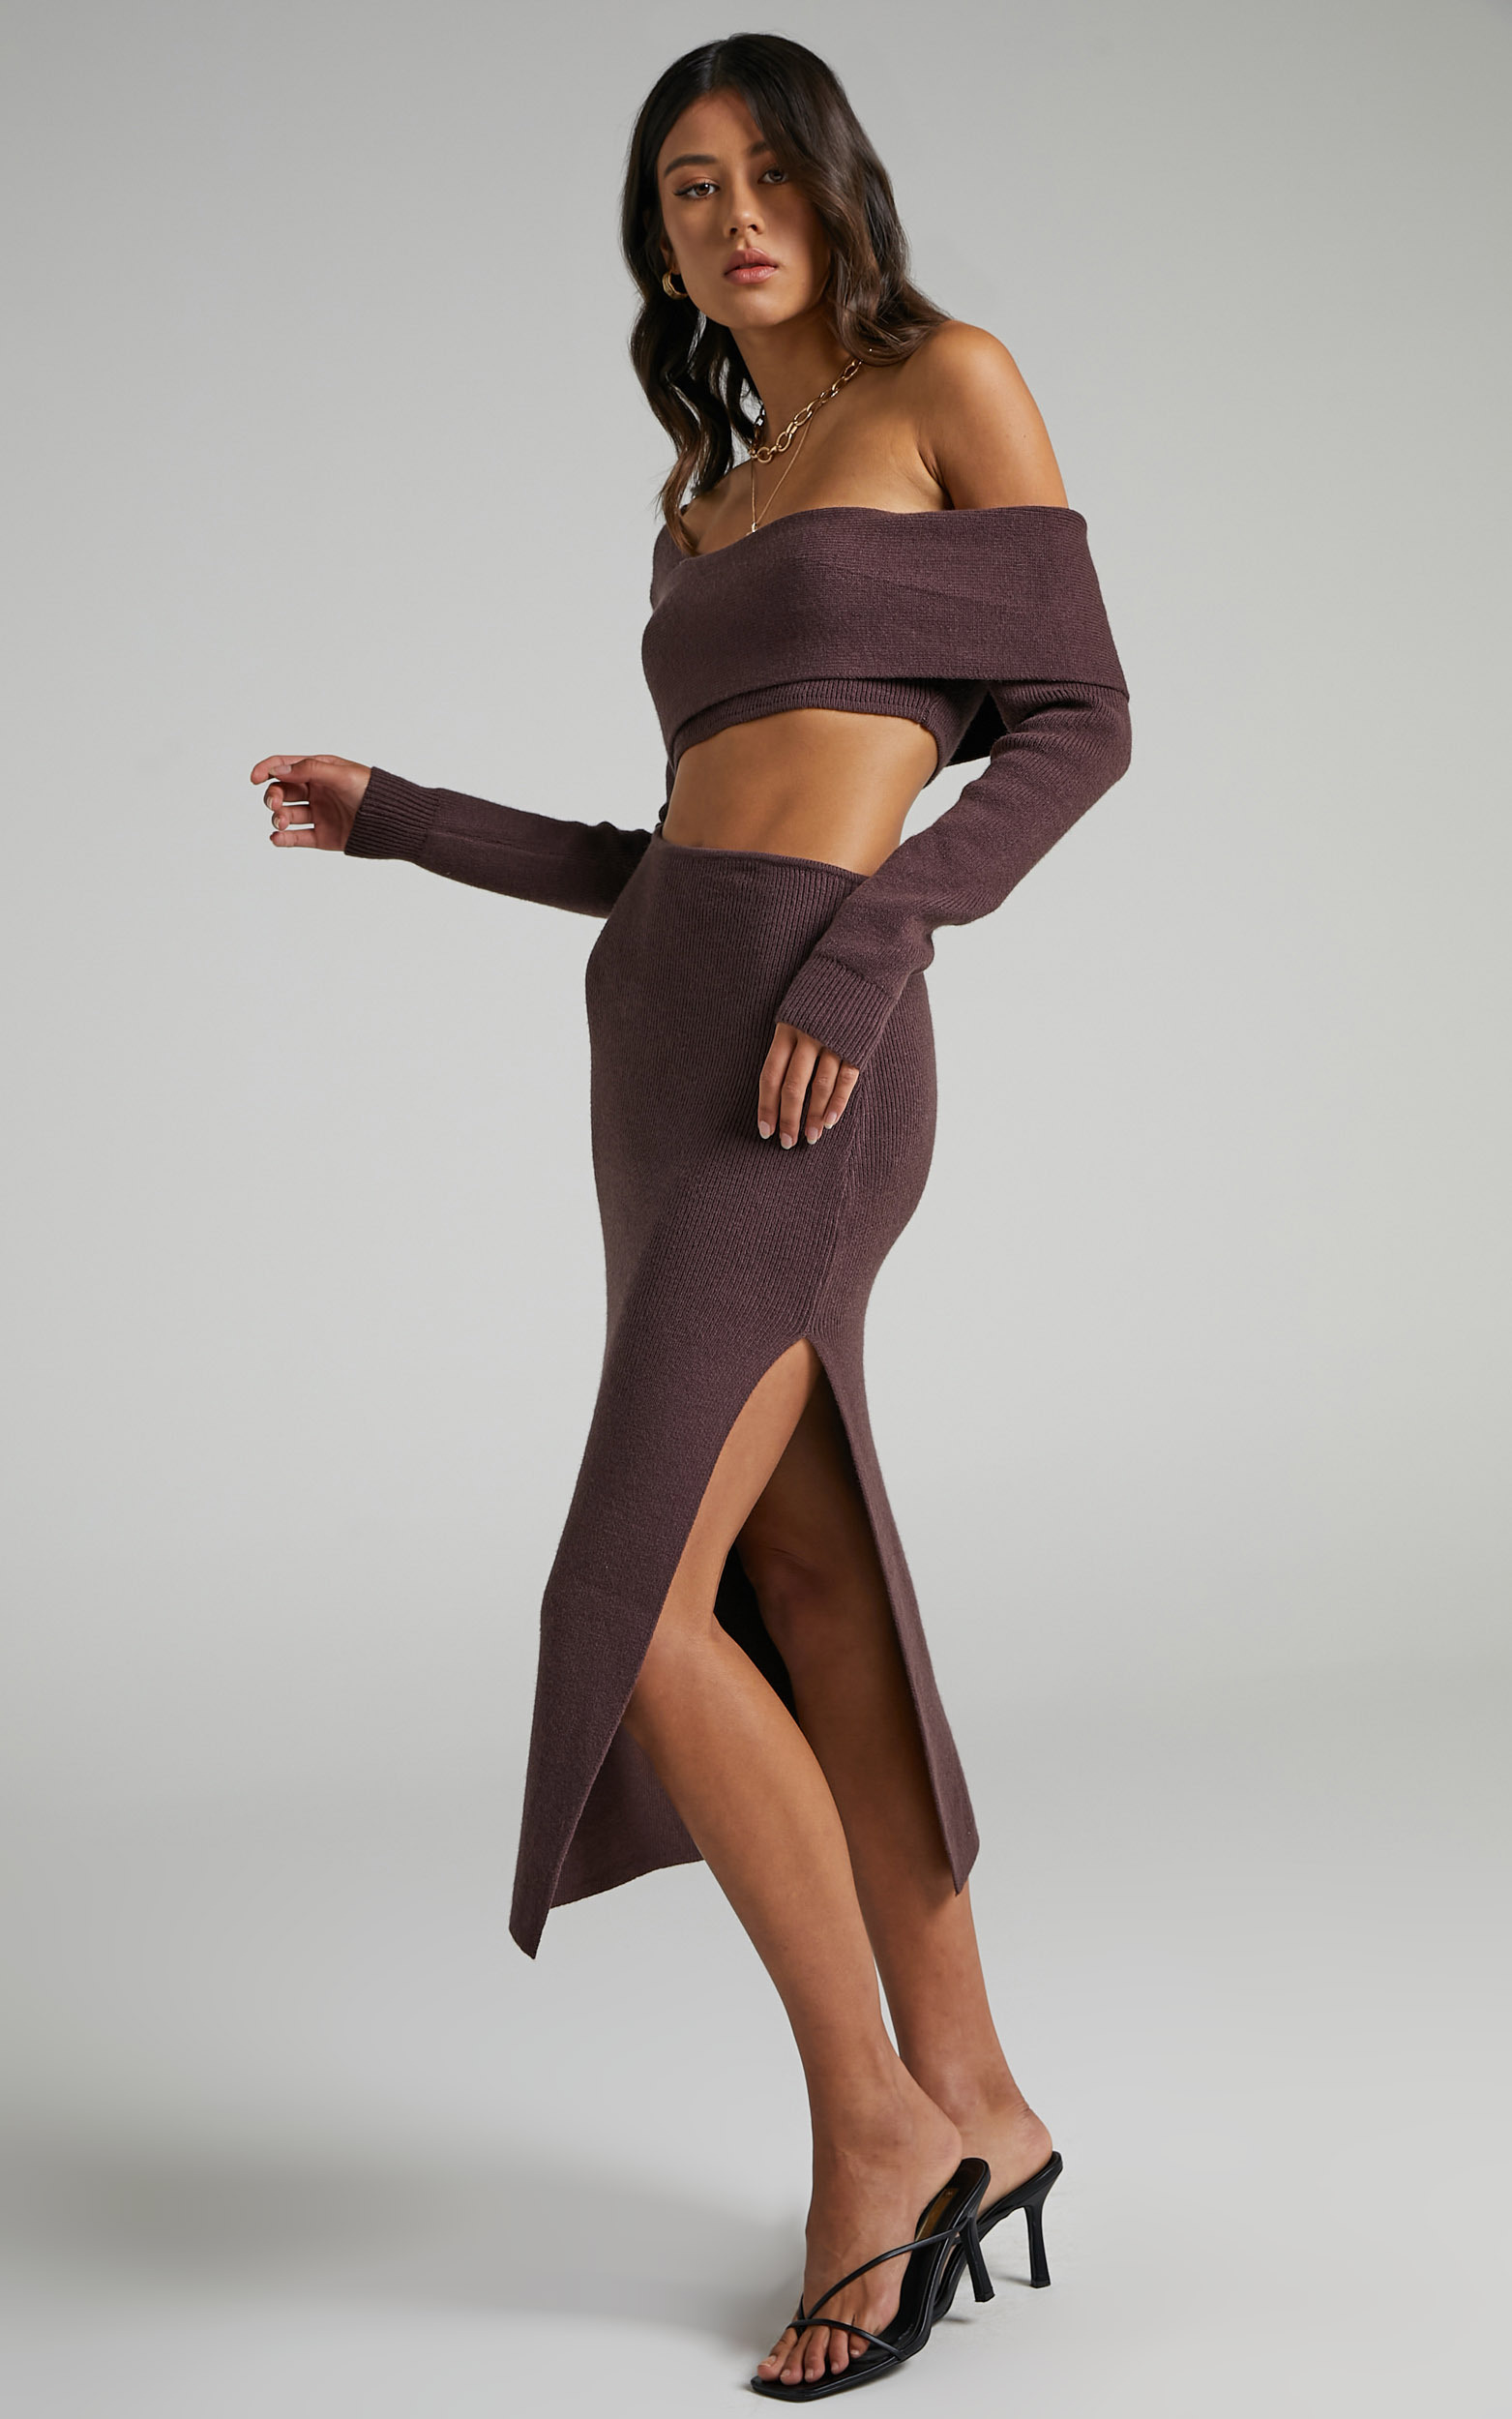 Alabama Midi Dress - Off One Shoulder Asymmetric Long Sleeve Knit Dress in Chocolate - 06, BRN3, hi-res image number null